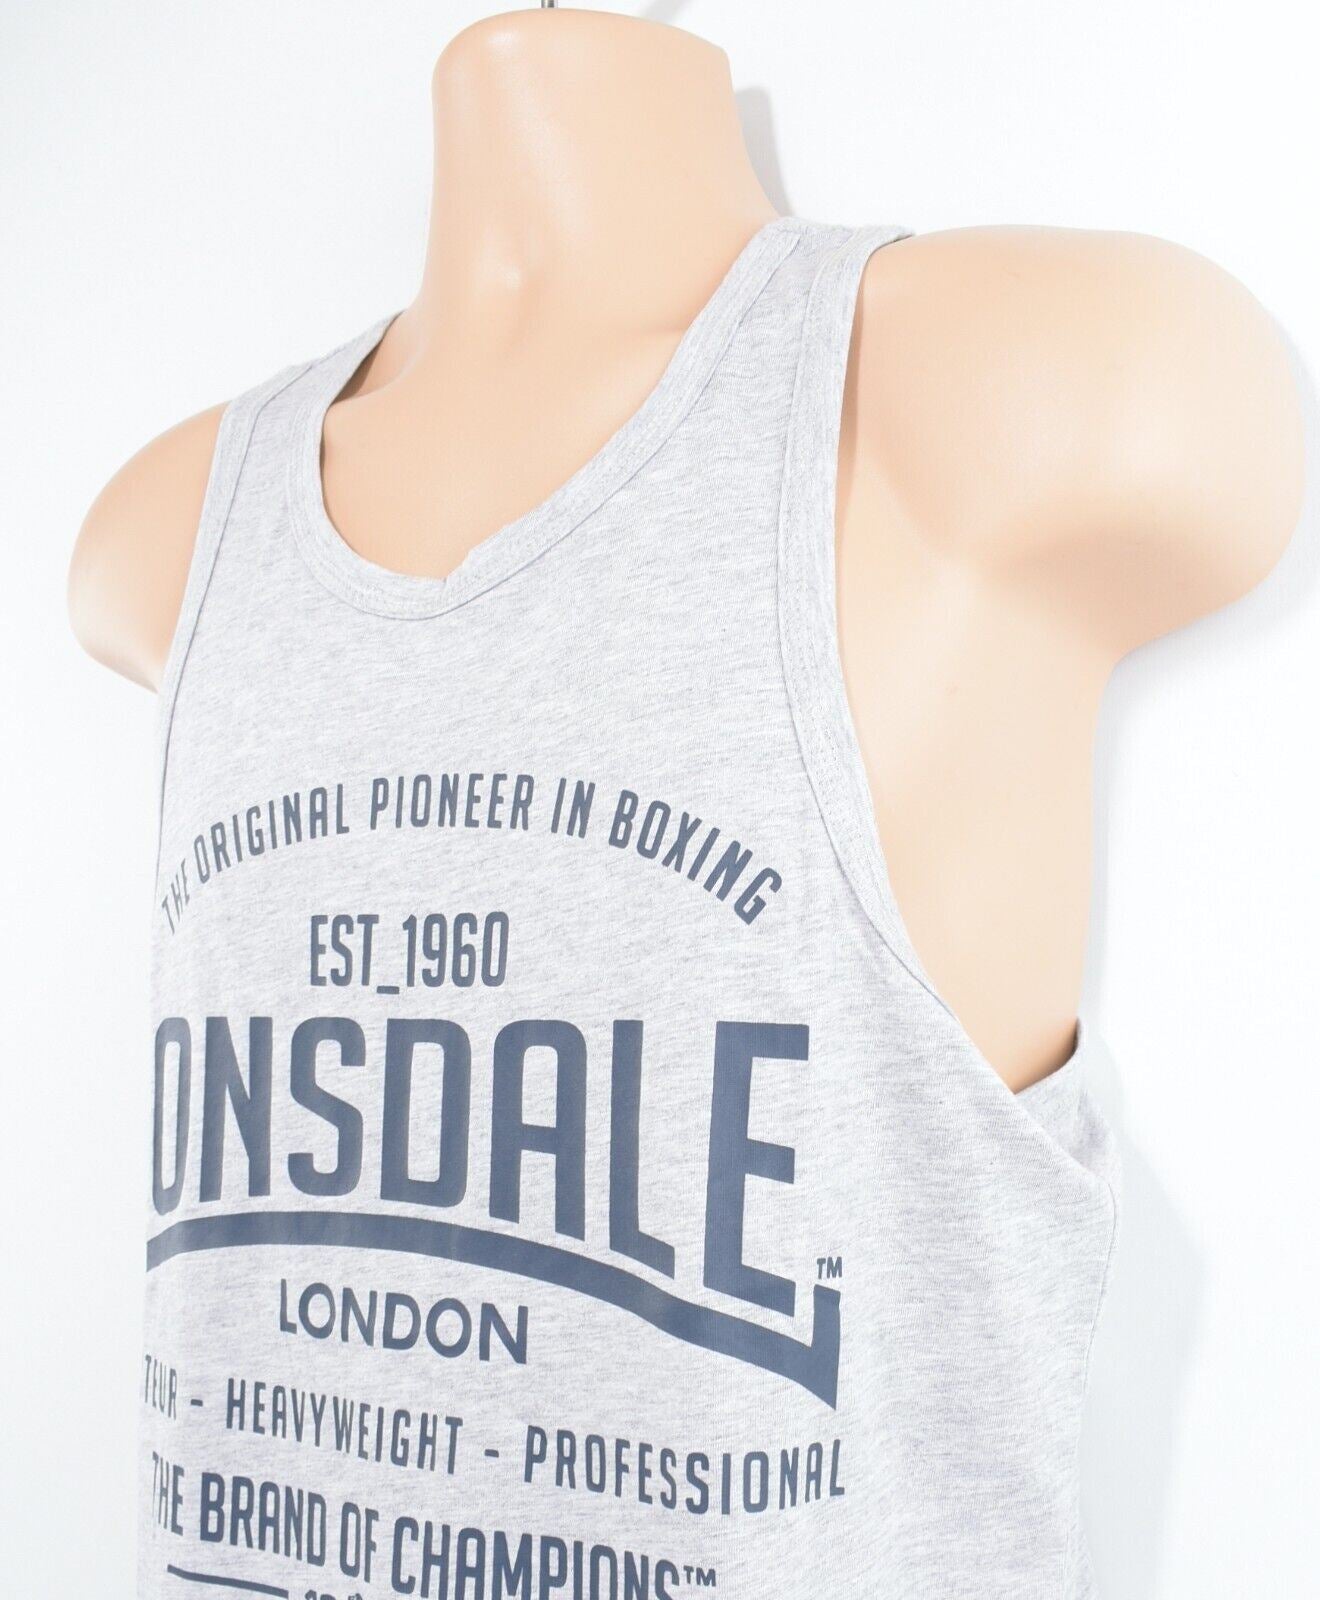 JOB LOT 40 x LONSDALE Men's Boxing Vest Tank Top Grey with Blue Print size SMALL